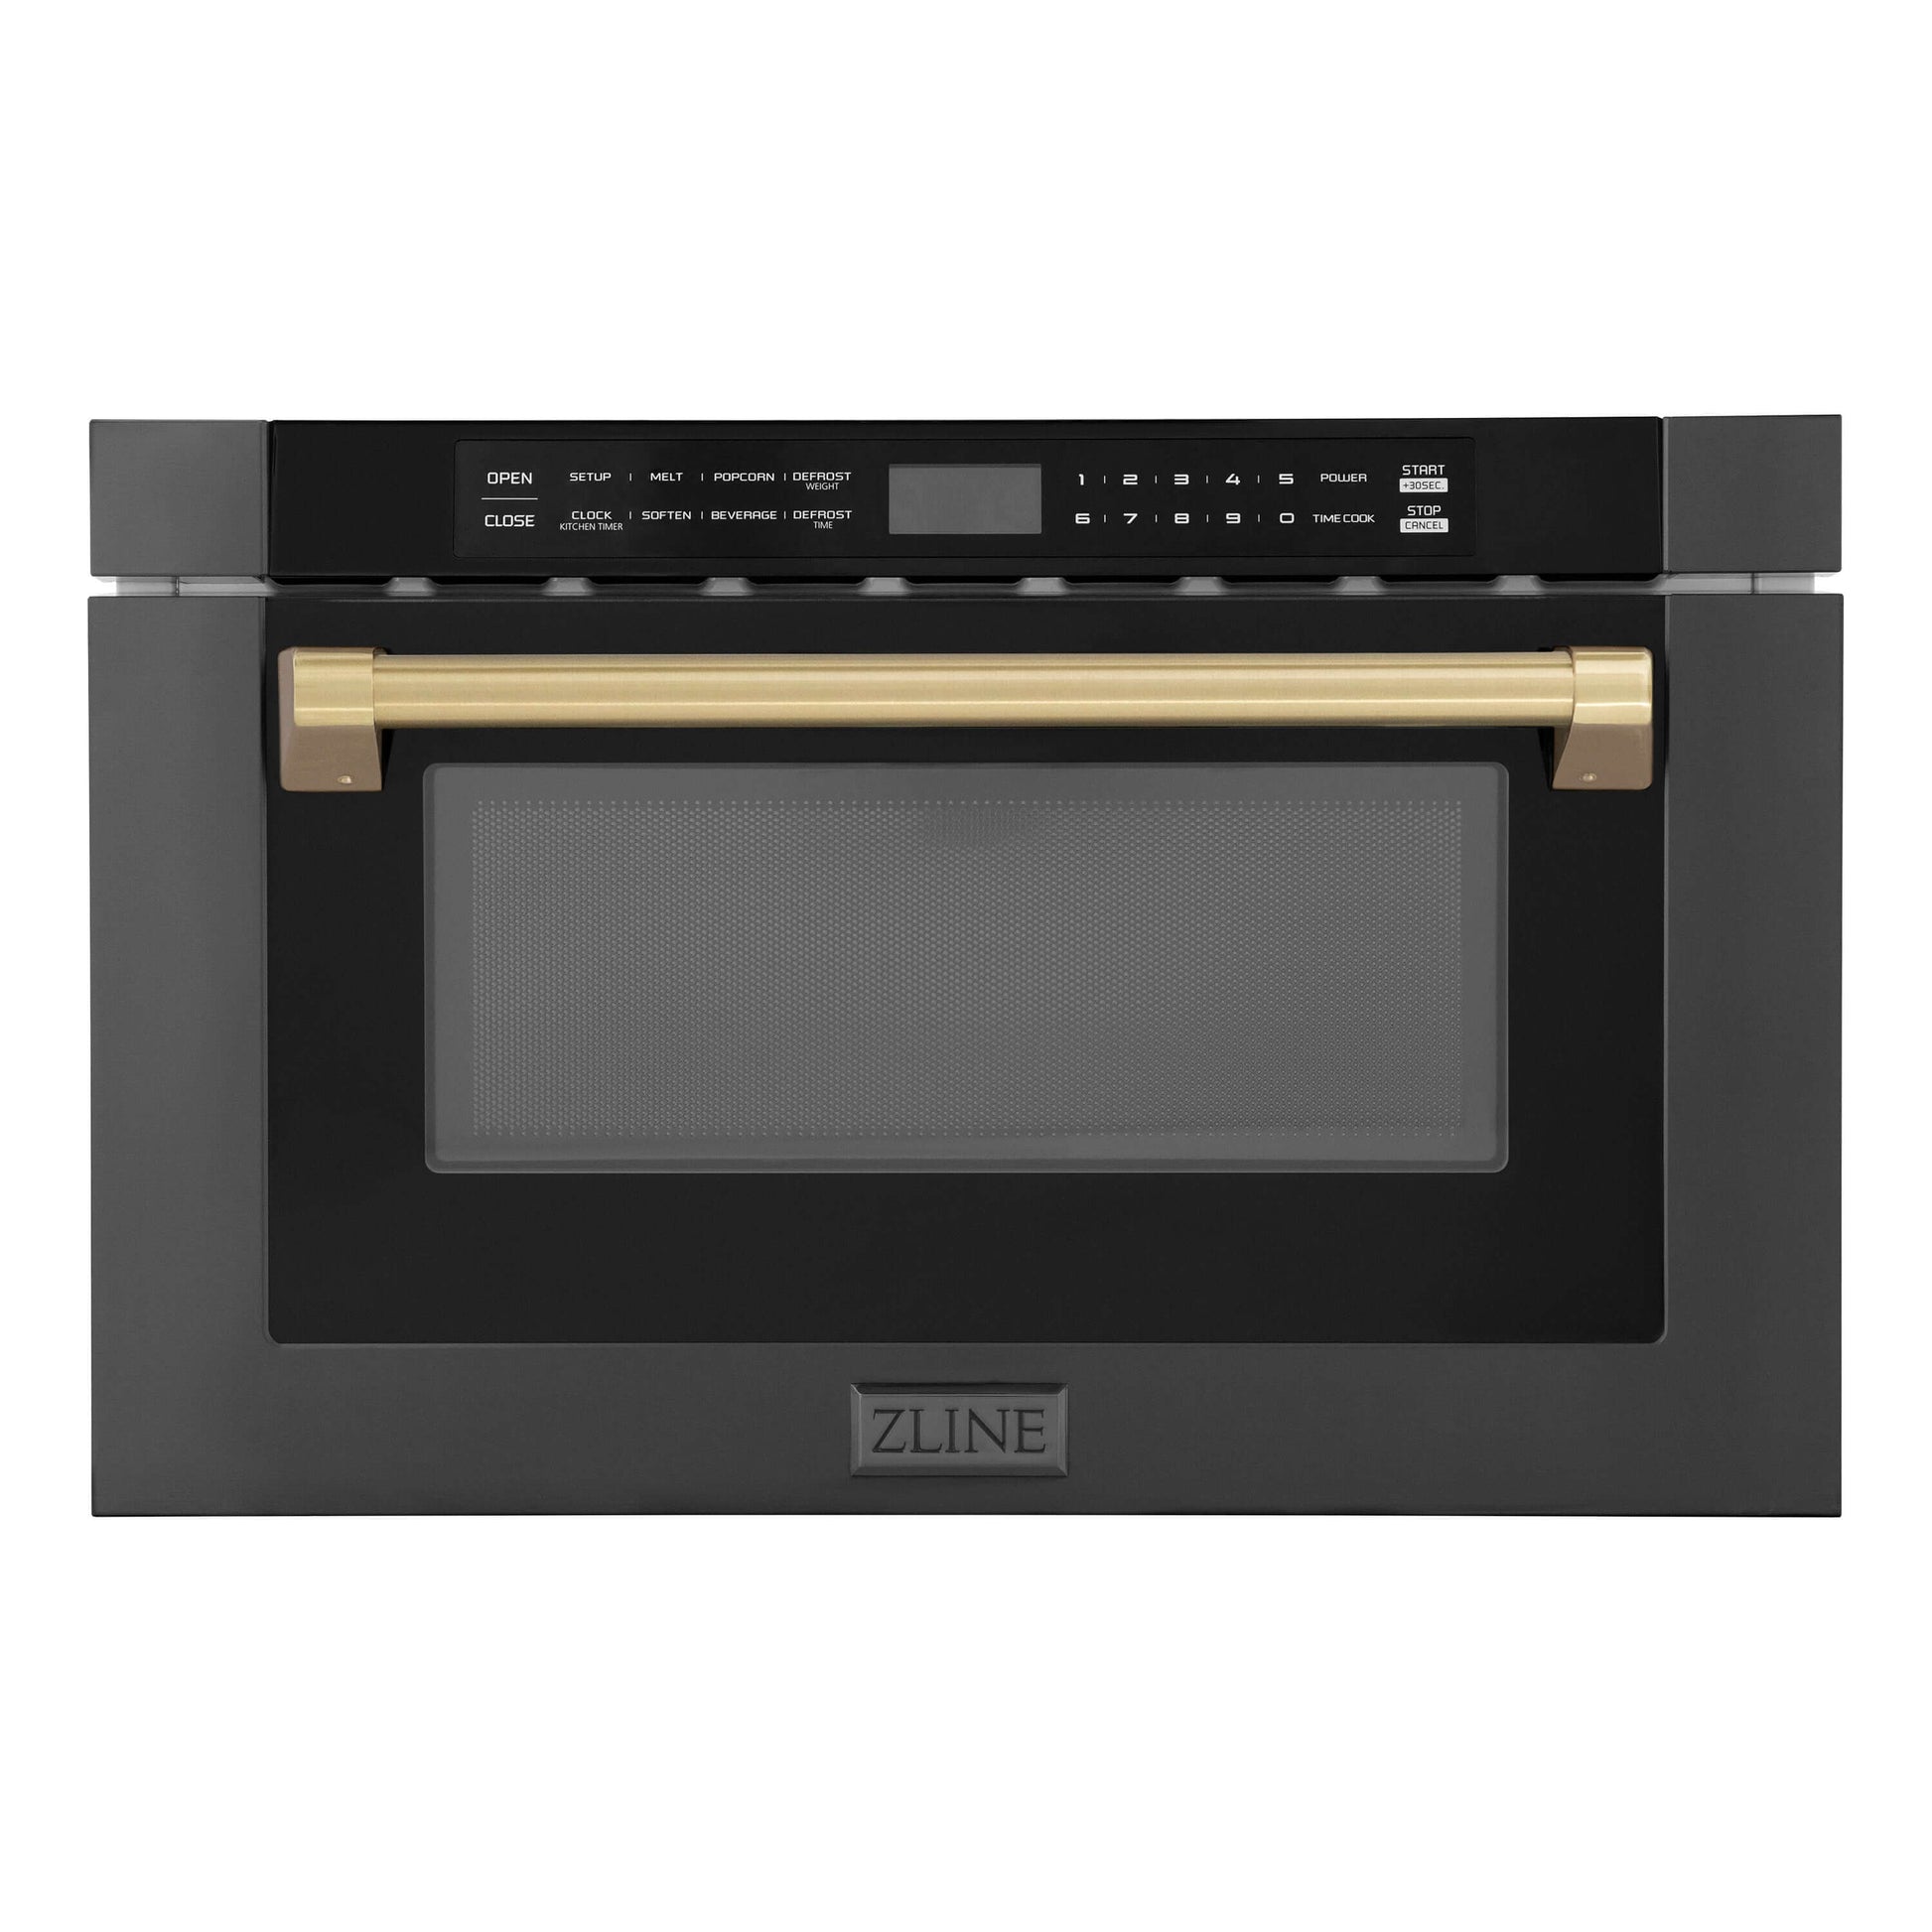 ZLINE Autograph Edition 24" Built-in Microwave Drawer - Black Stainless Steel with Accents